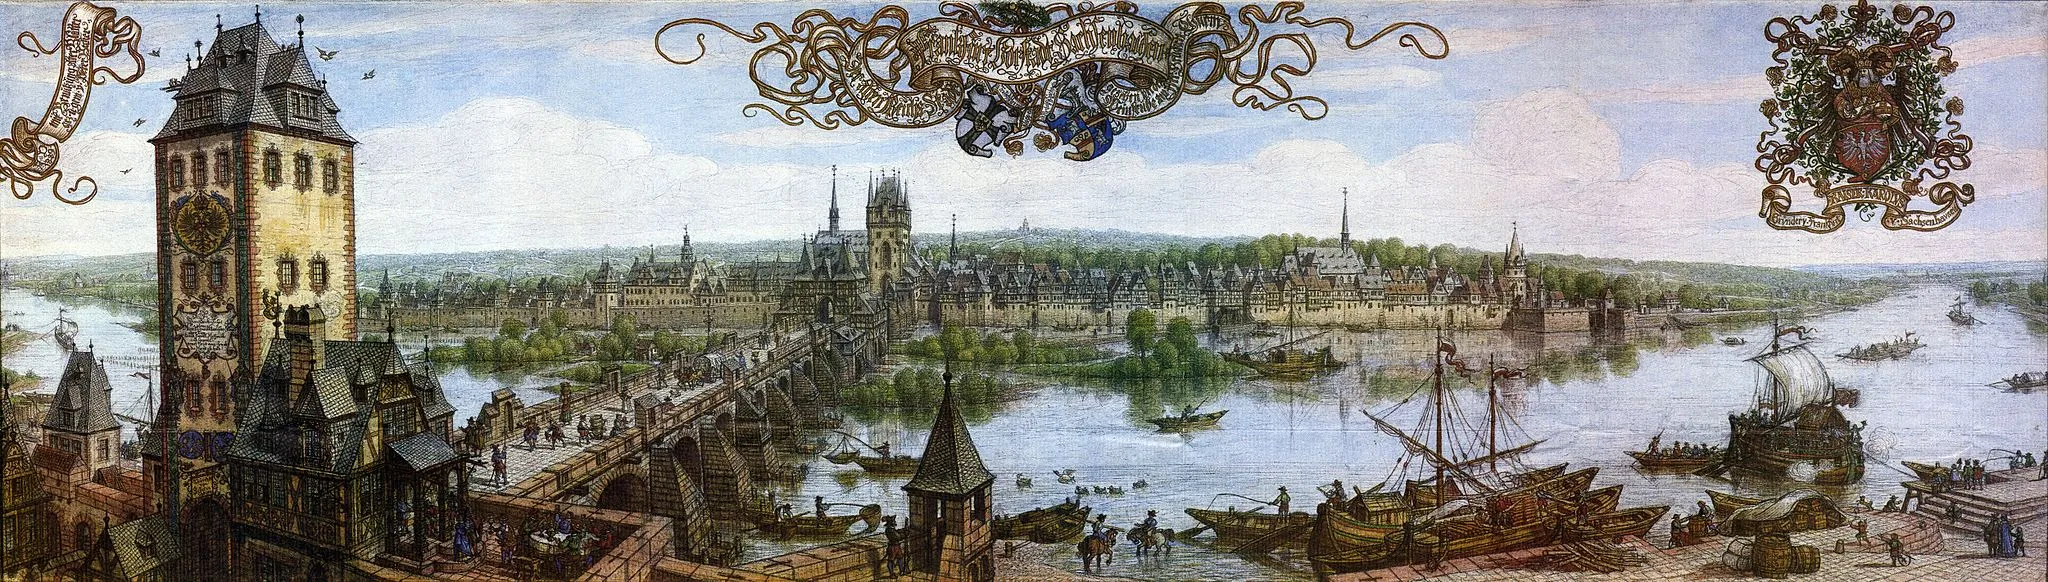 Photo showing: Frankfurt's Vorstadt of Sachsenhausen at the beginning of the 17th century, water colour; transcript of the headline (from left to right): „AD 1889 / under use of old documents drawn and painted by Peter Becker / the old imperial city / Frankfurt's suburbia Sachsenhausen / as seen from the inn at the old bridge tower / founder of Frankfurt / Charlemagne / and Sachsenhausen“